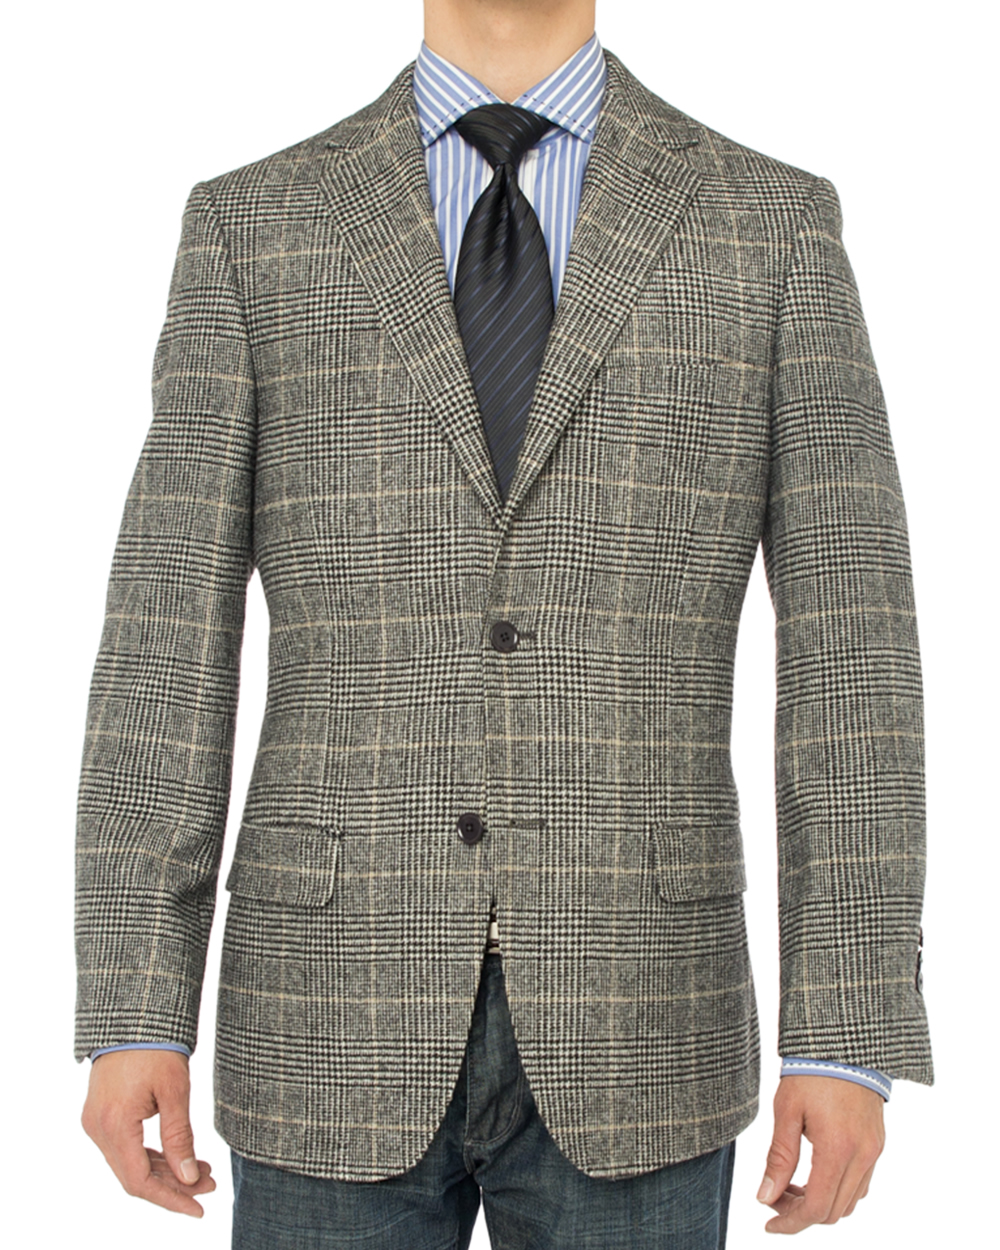 Luciano Natazzi Mens 2 Button Luxe Camel Hair Suit Jacket Sport Coat ...